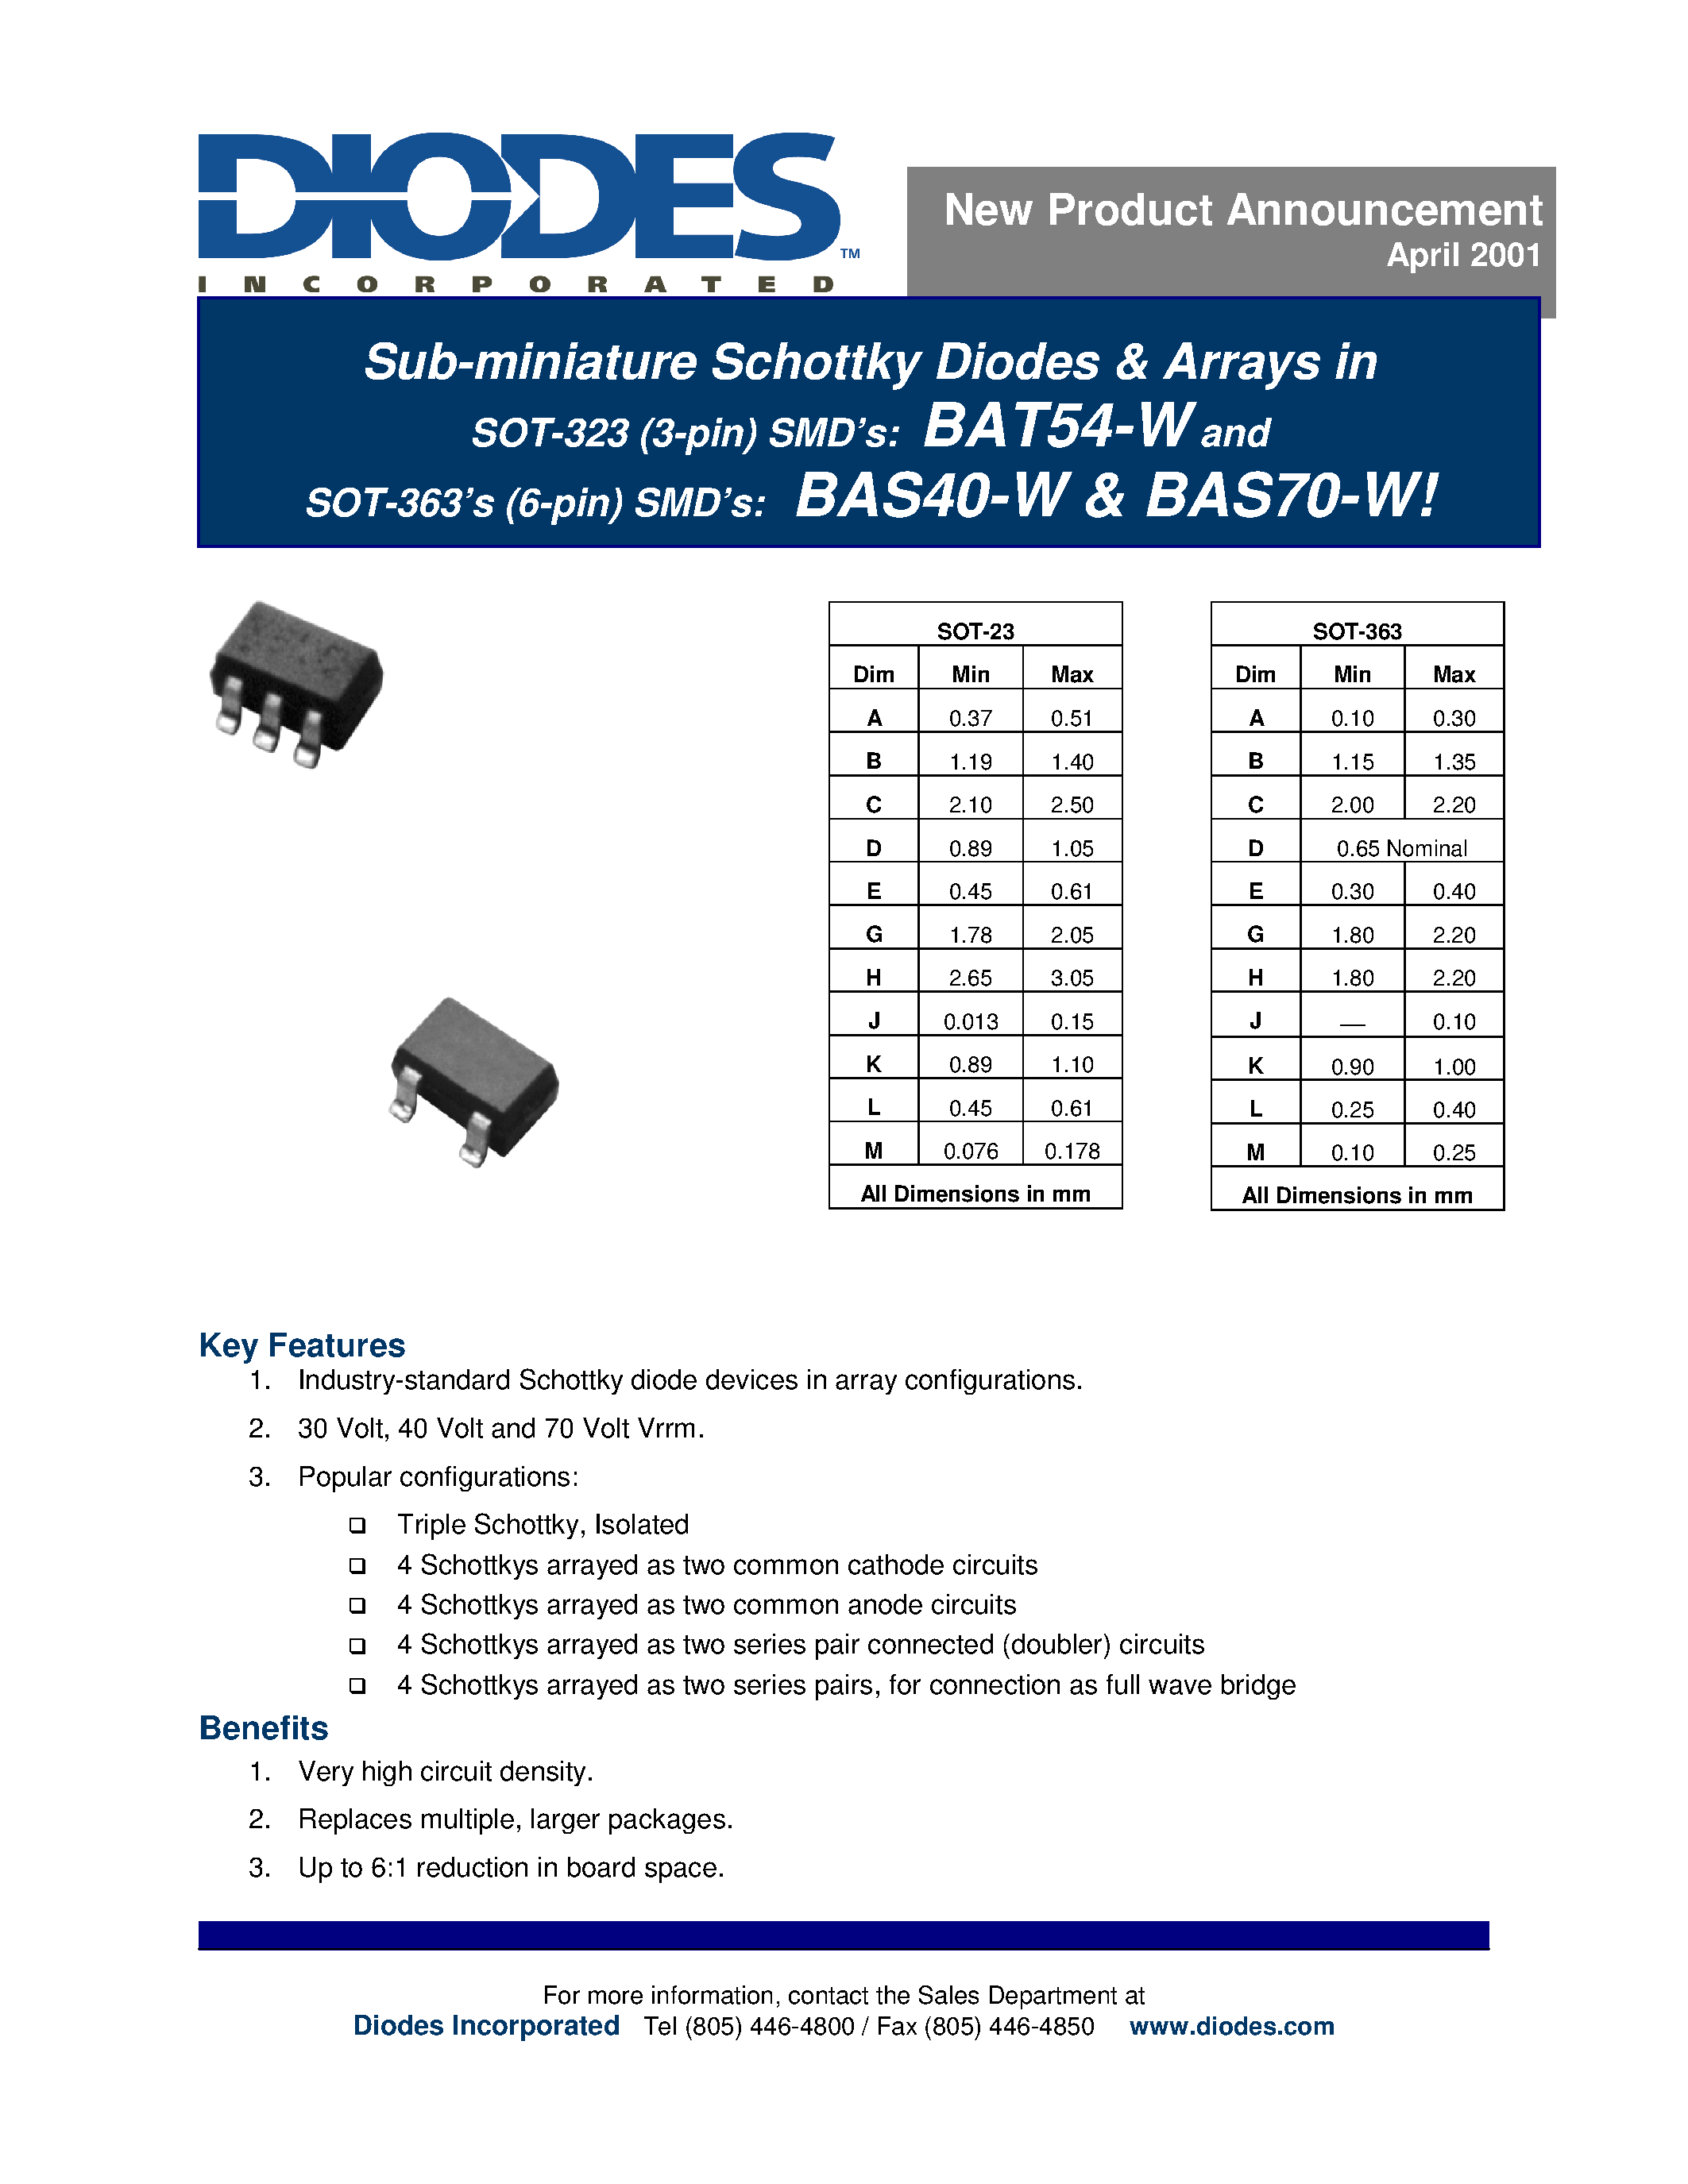 Datasheet BAS40-W - Sub-miniature Schottky Diodes & Arrays in page 1